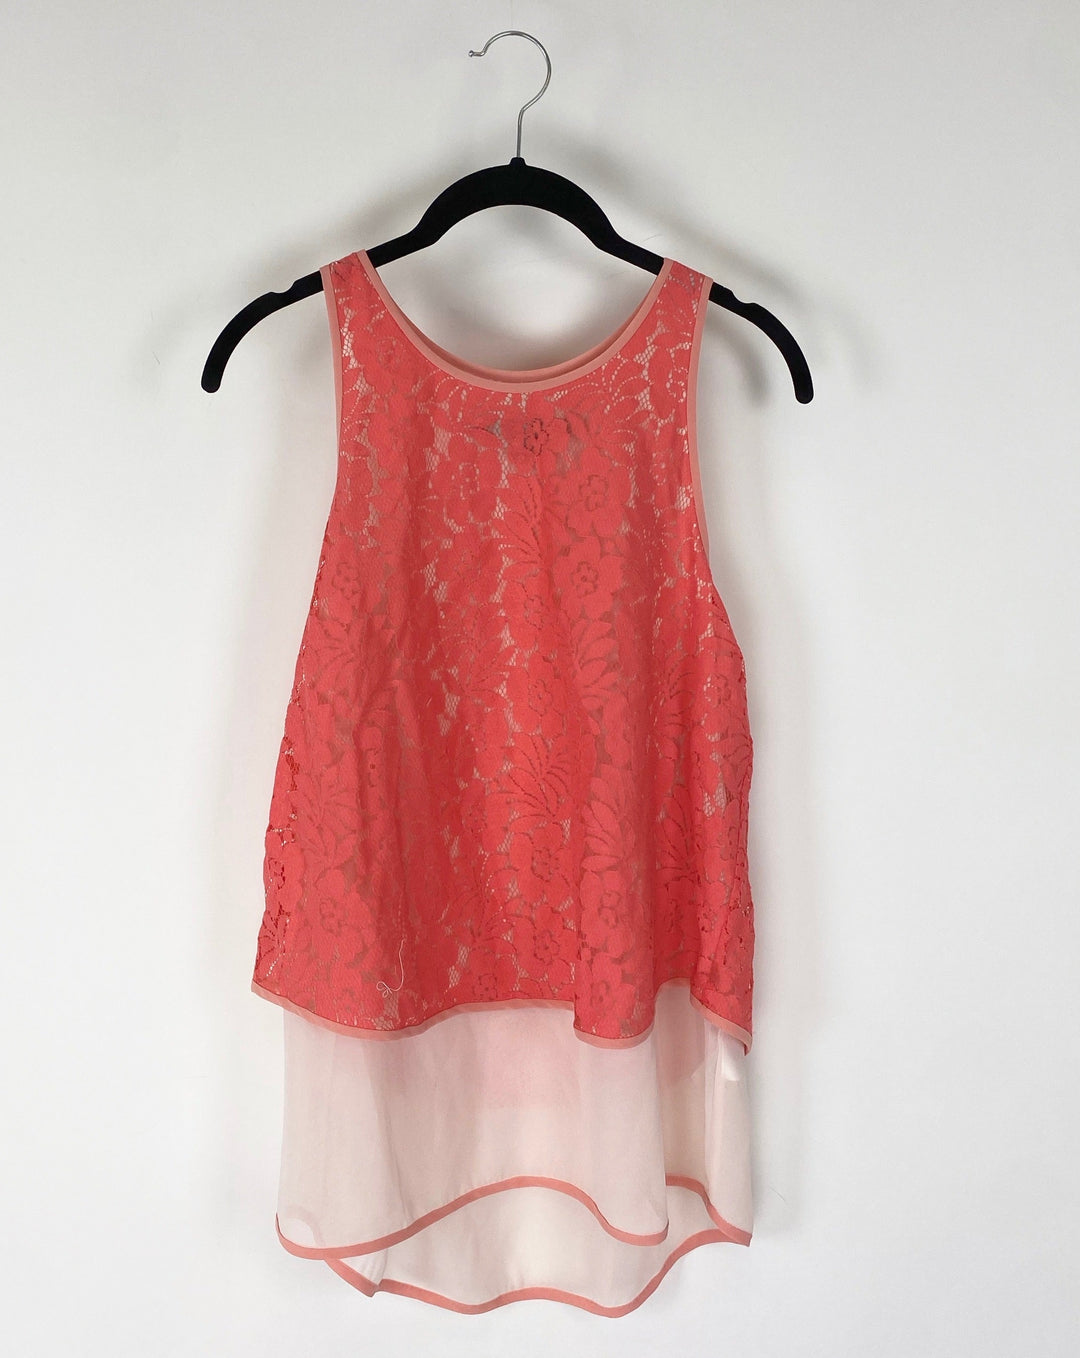 Coral Lace Top - Size 4